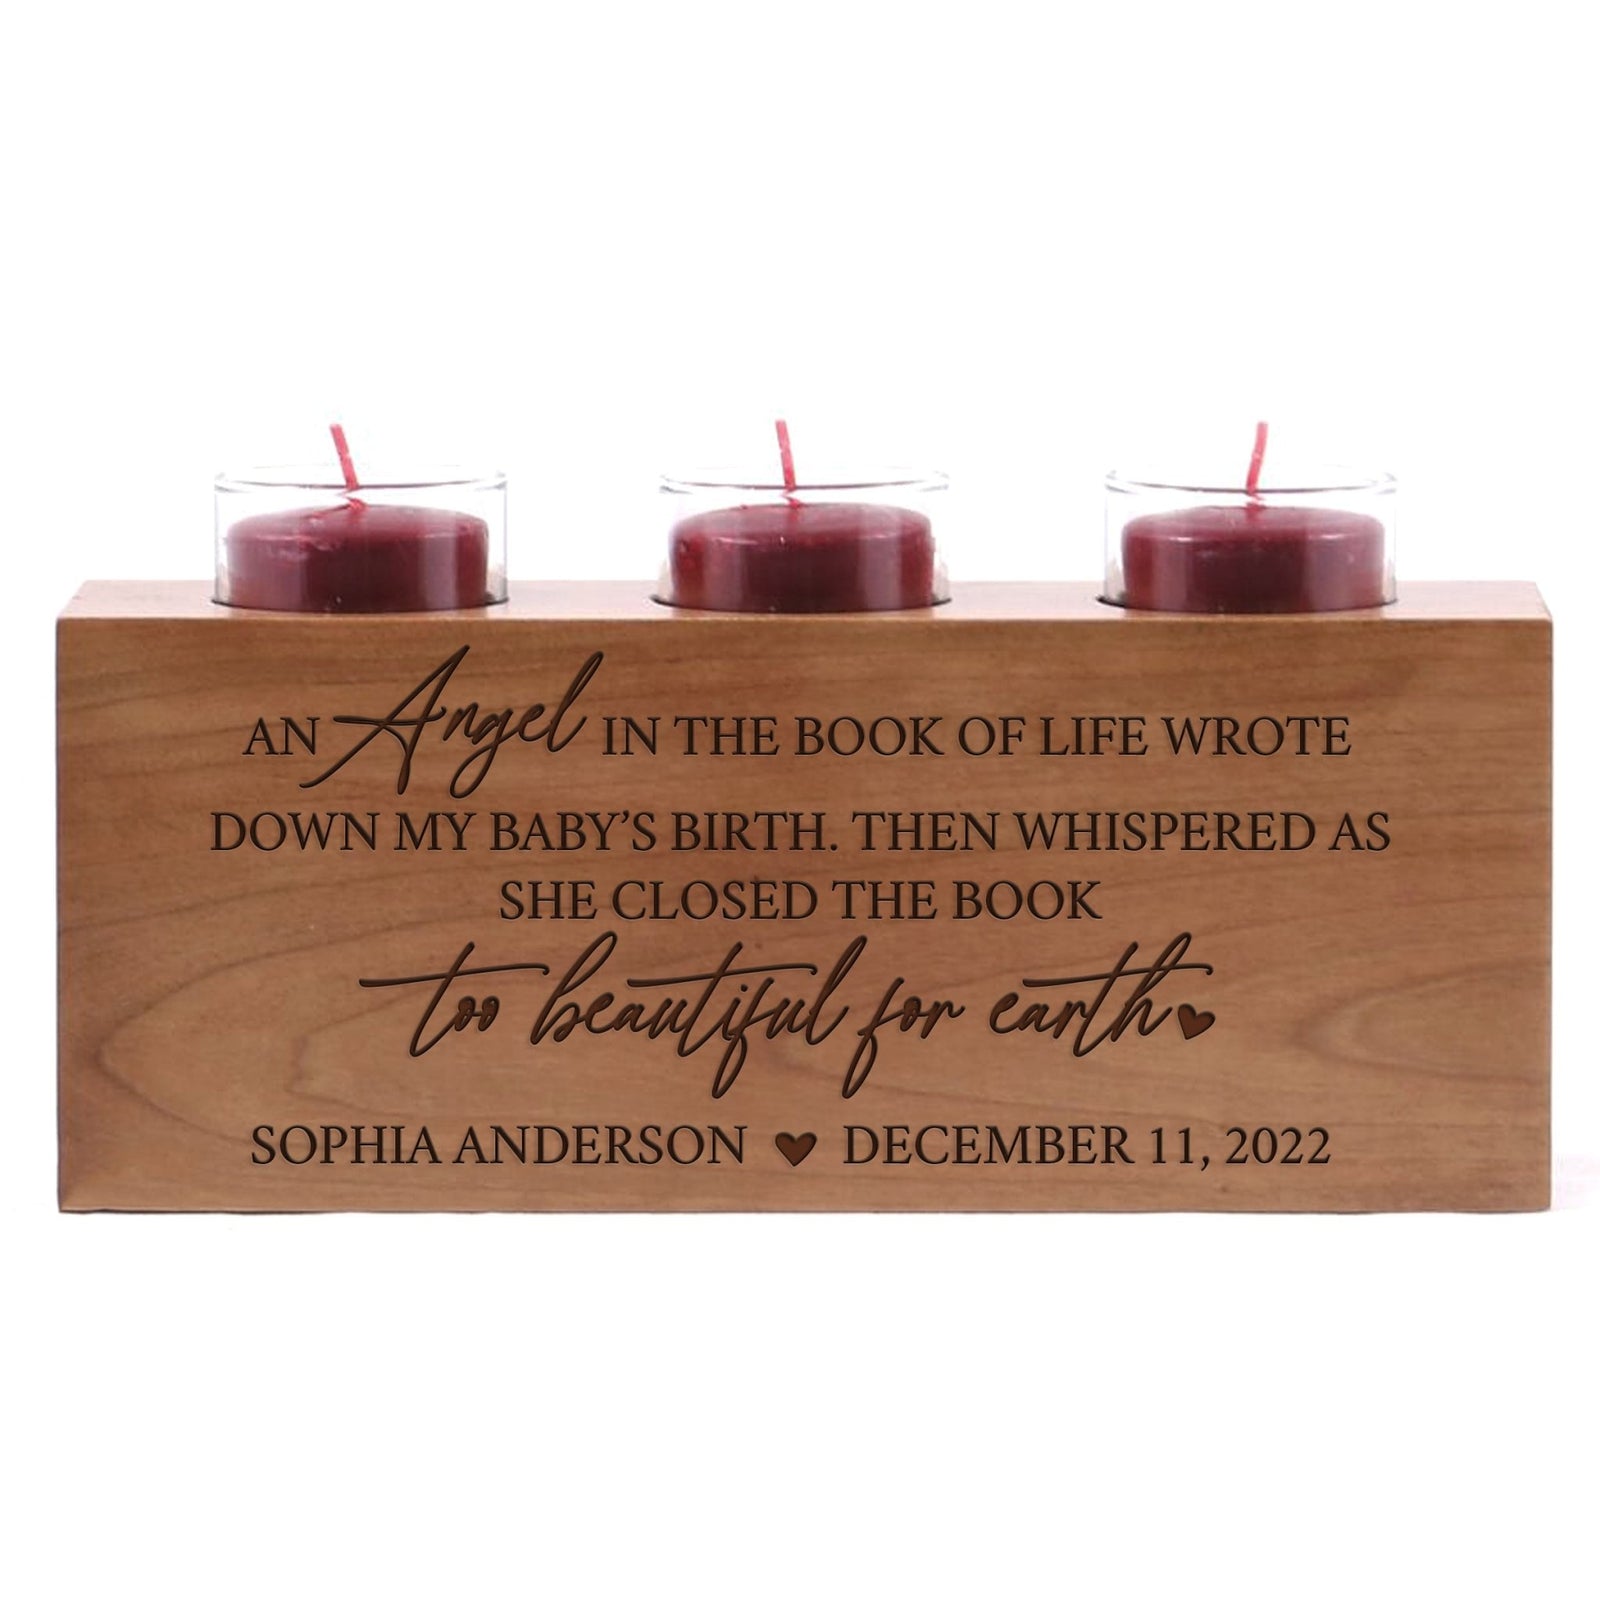 Custom Engraved Memorial Tealight Glass Votives Candle Holder - An Angel In The Book of Life - LifeSong Milestones